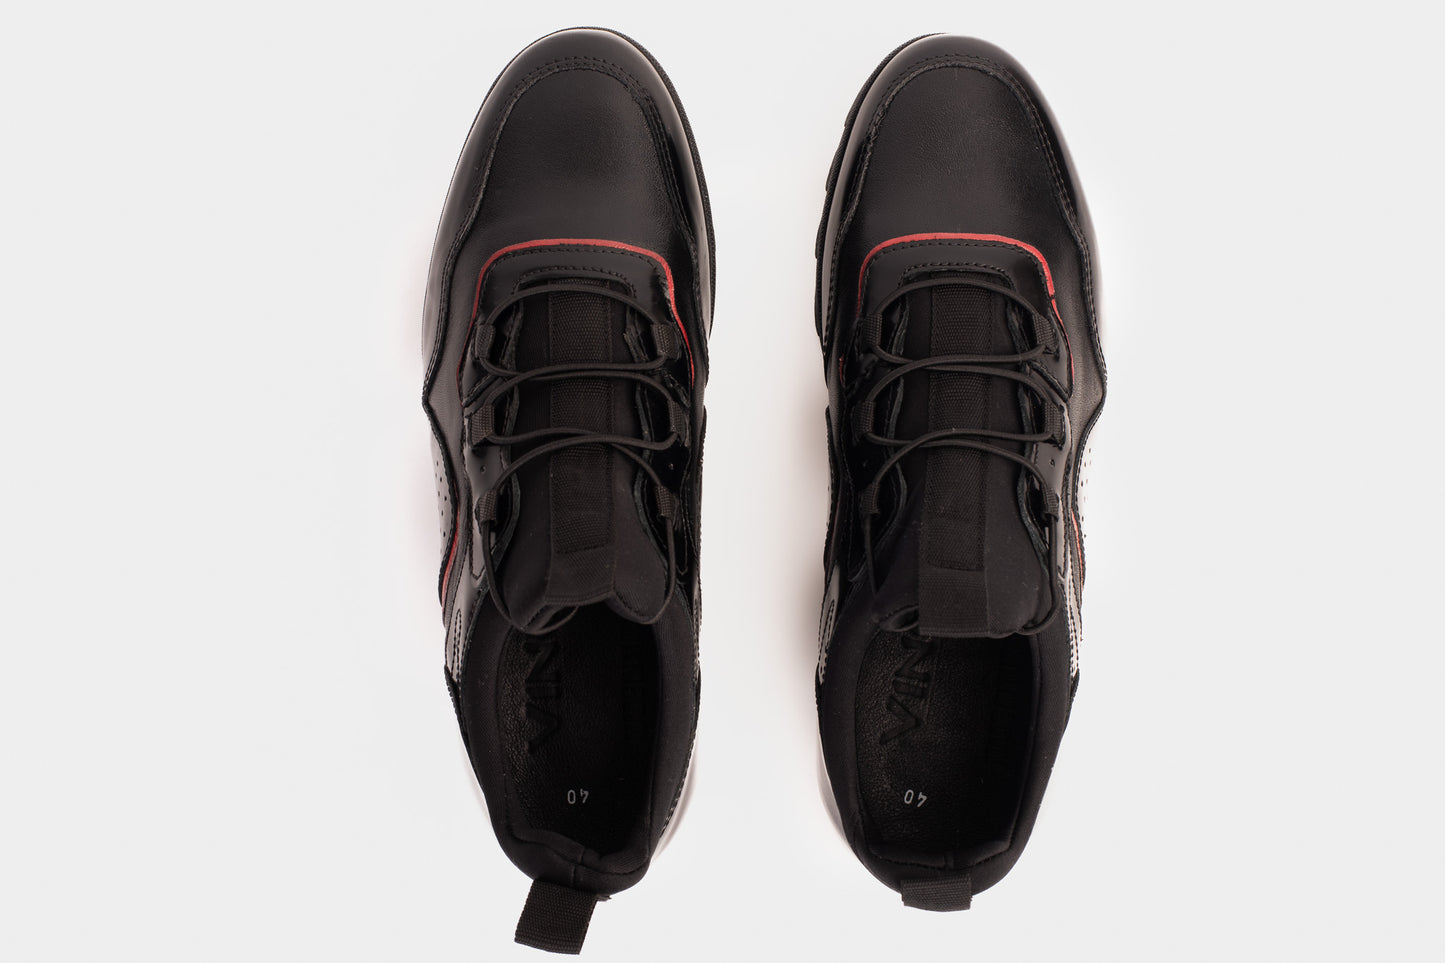 The Madrid Black & Red Leather Casual  Men Shoe